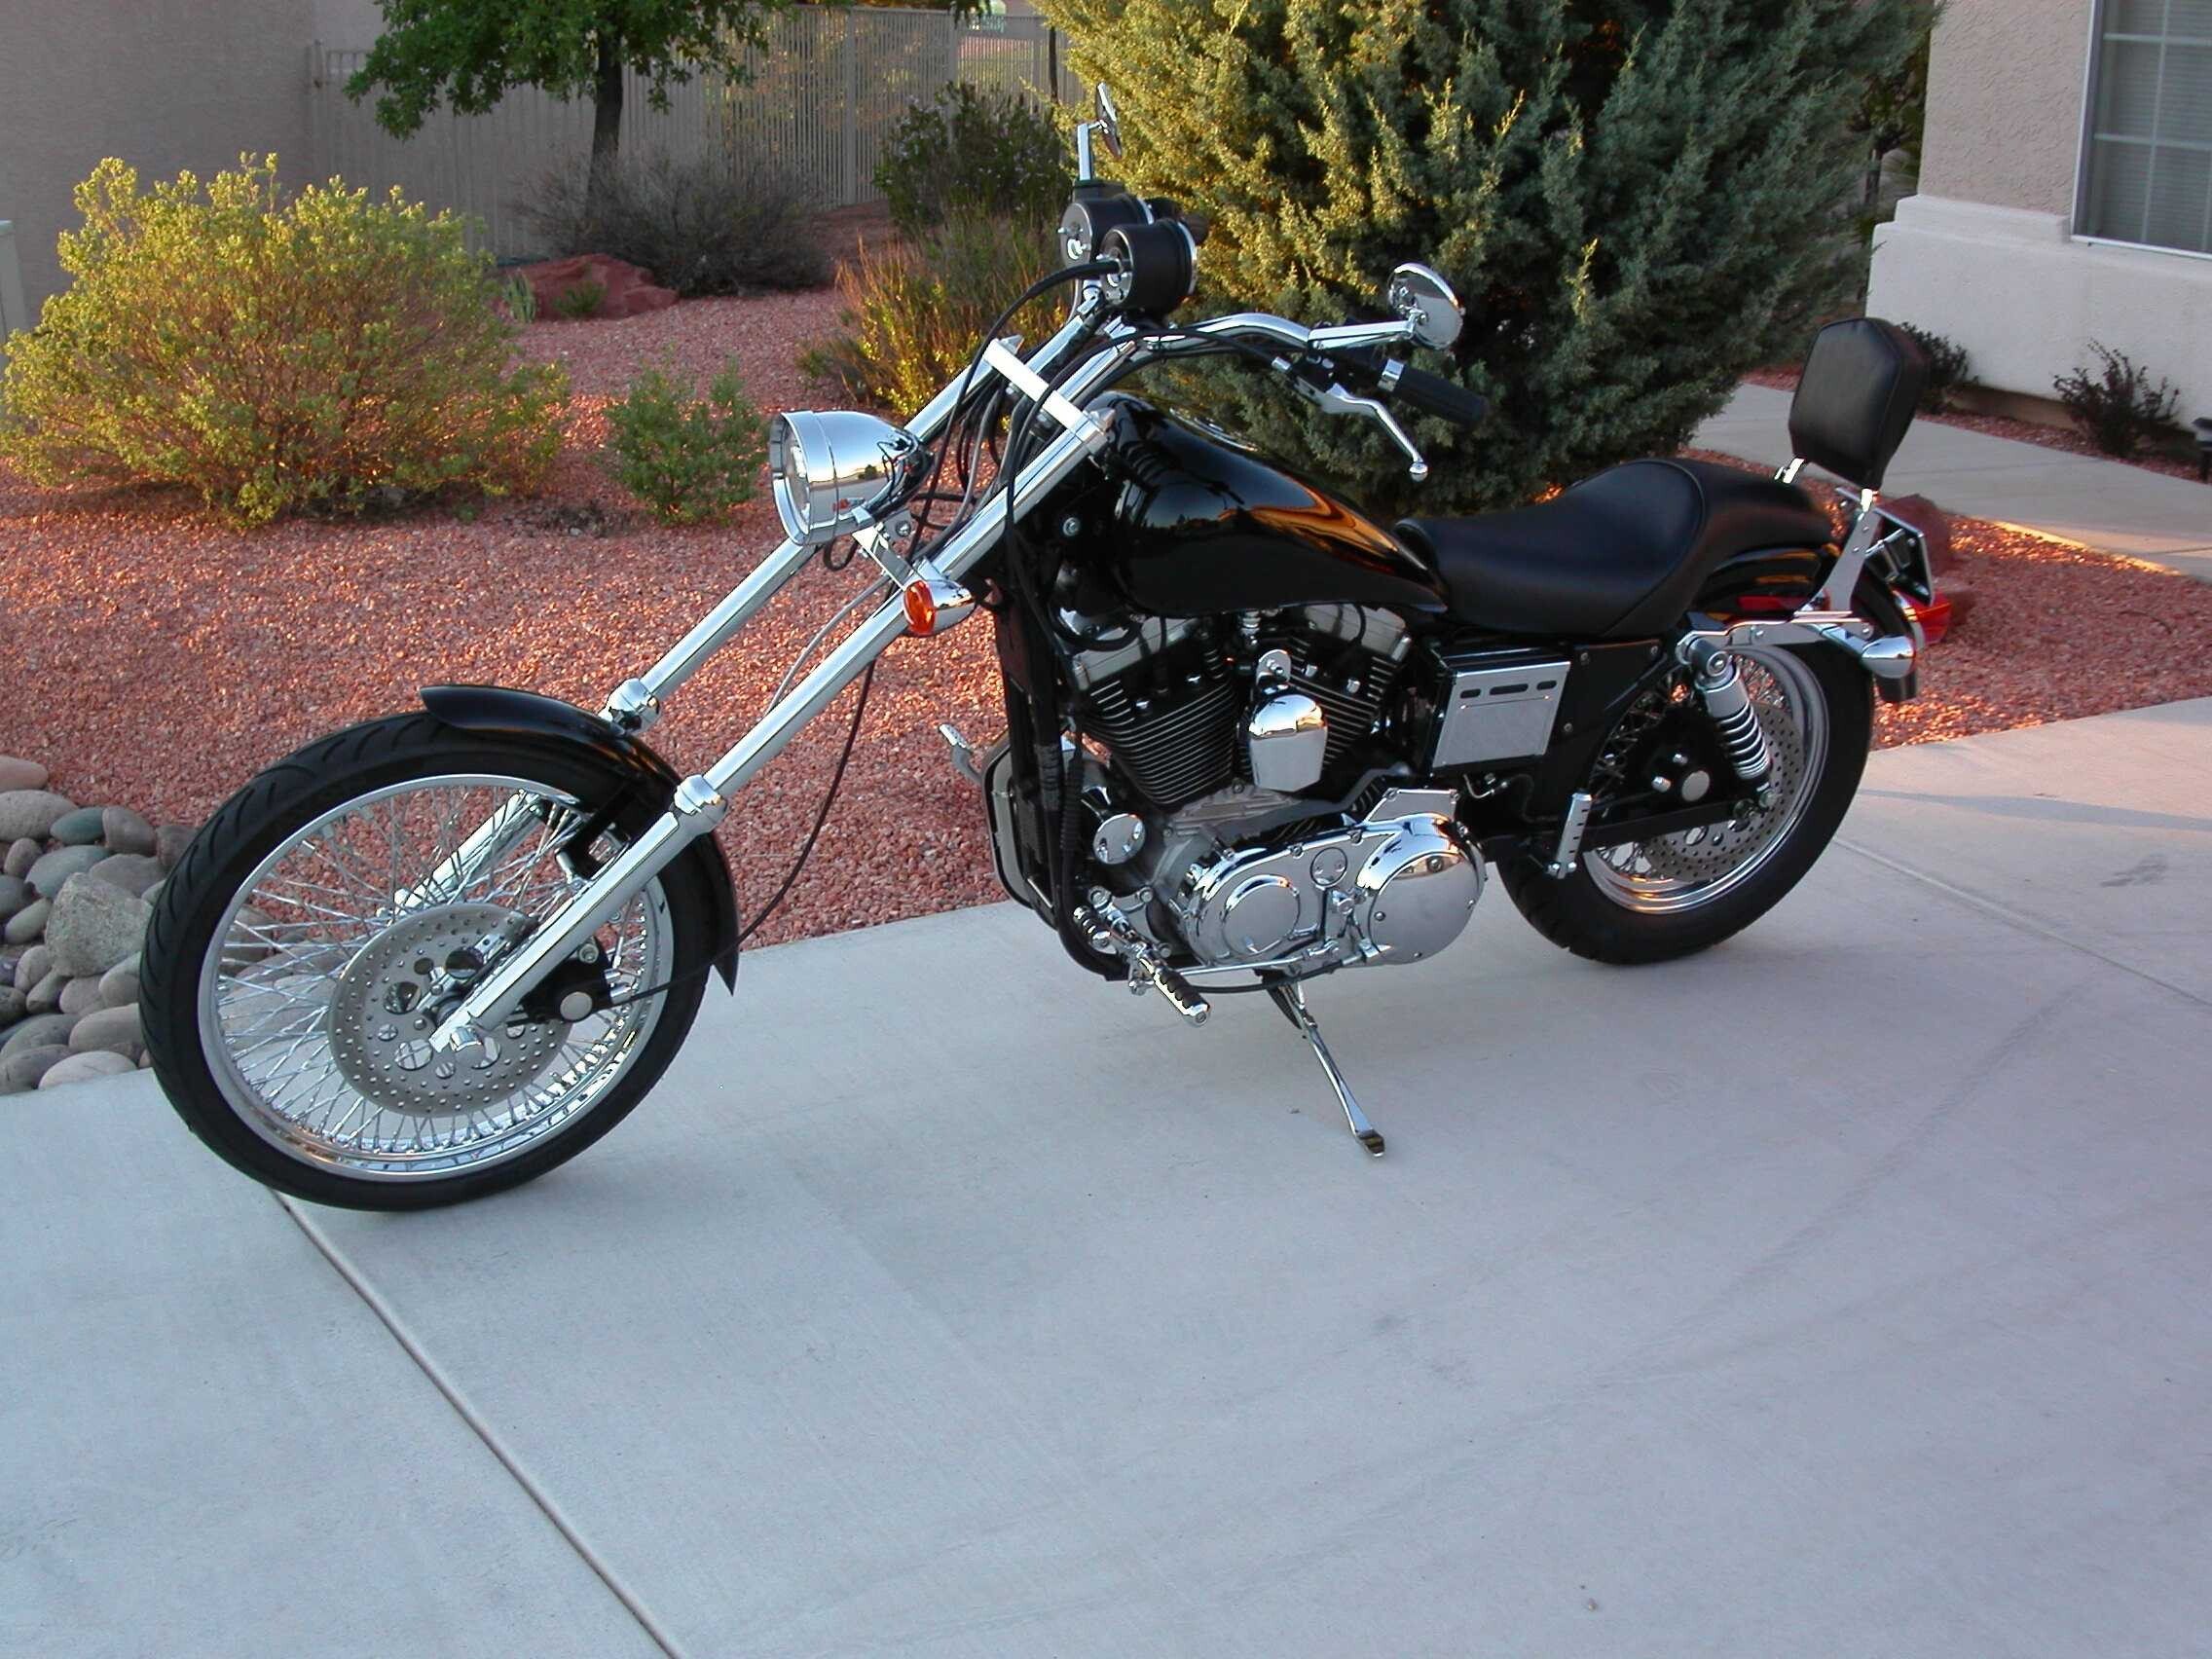 1994 Harley Davidson Sportster Motorcycles For Sale Motorcycles On Autotrader